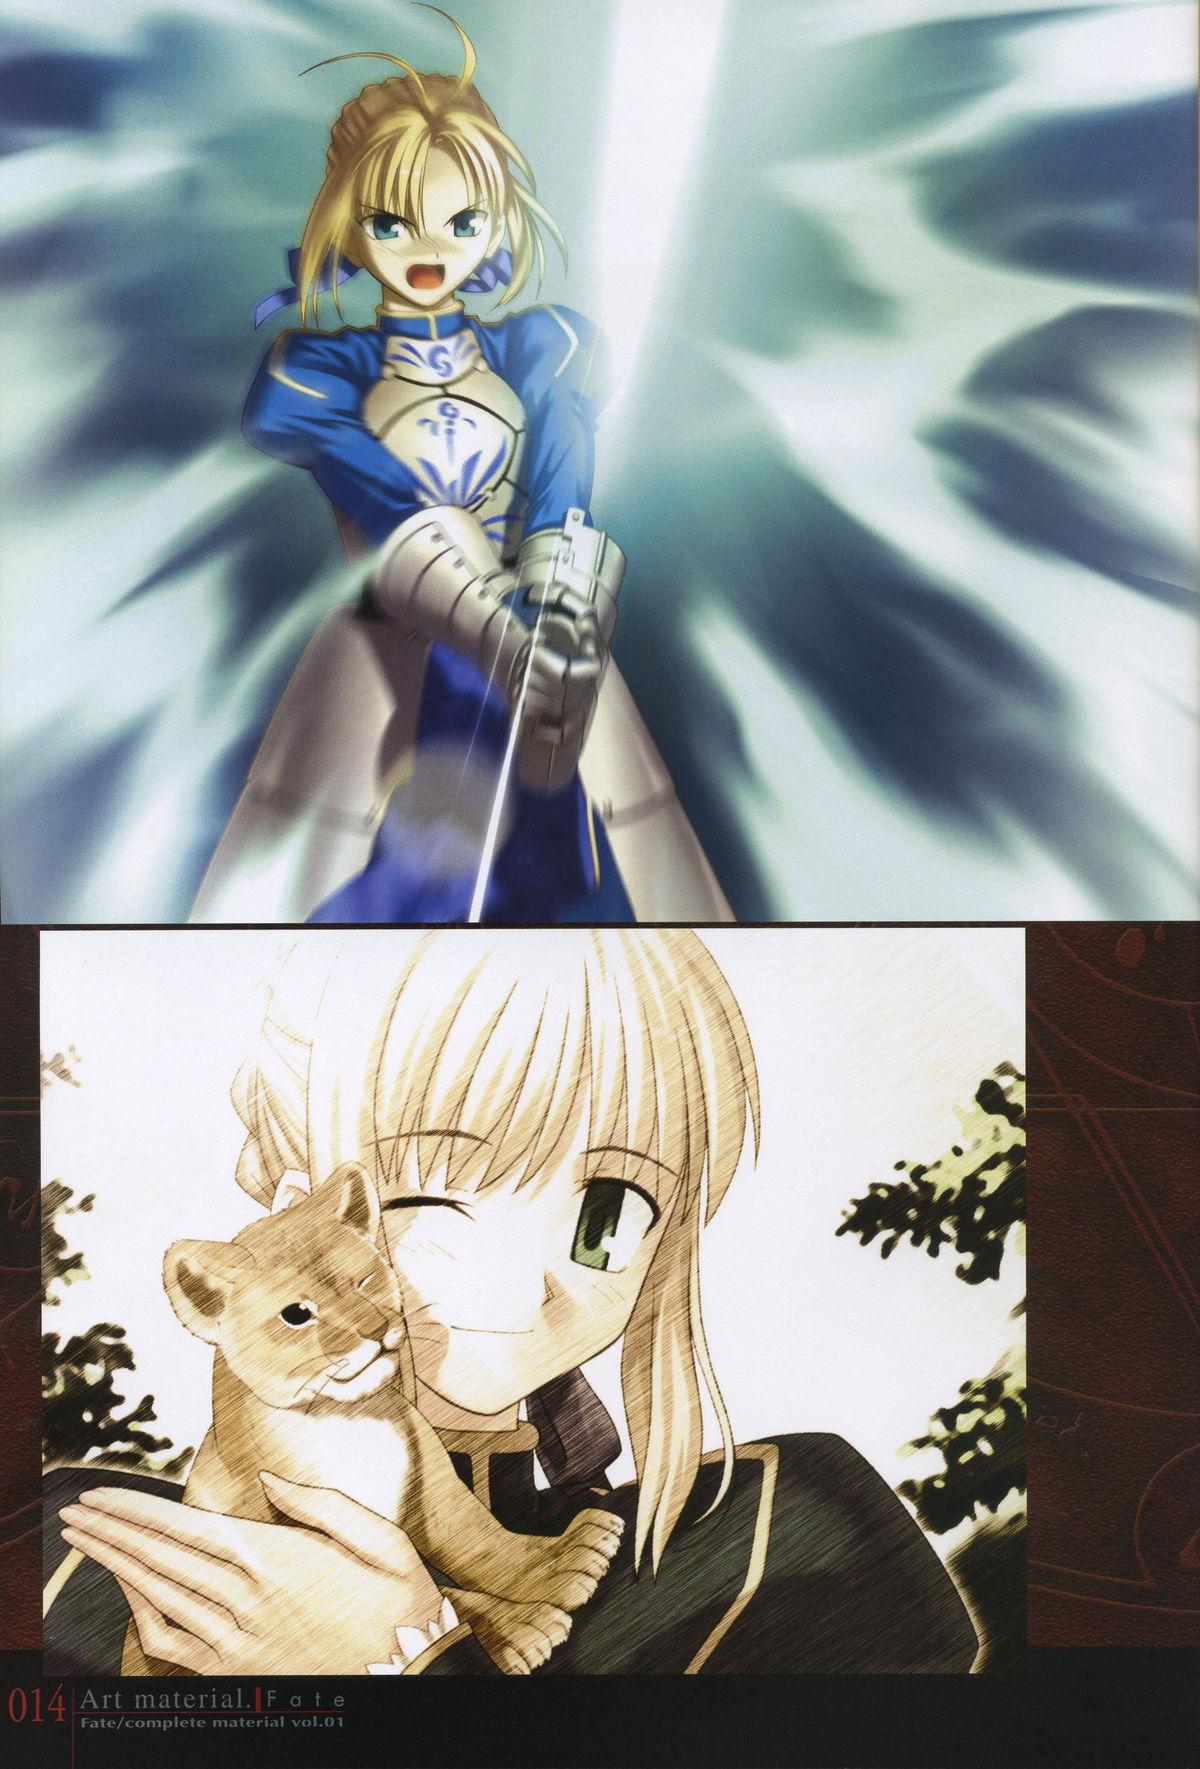 Fate/complete material I - Art material. 18